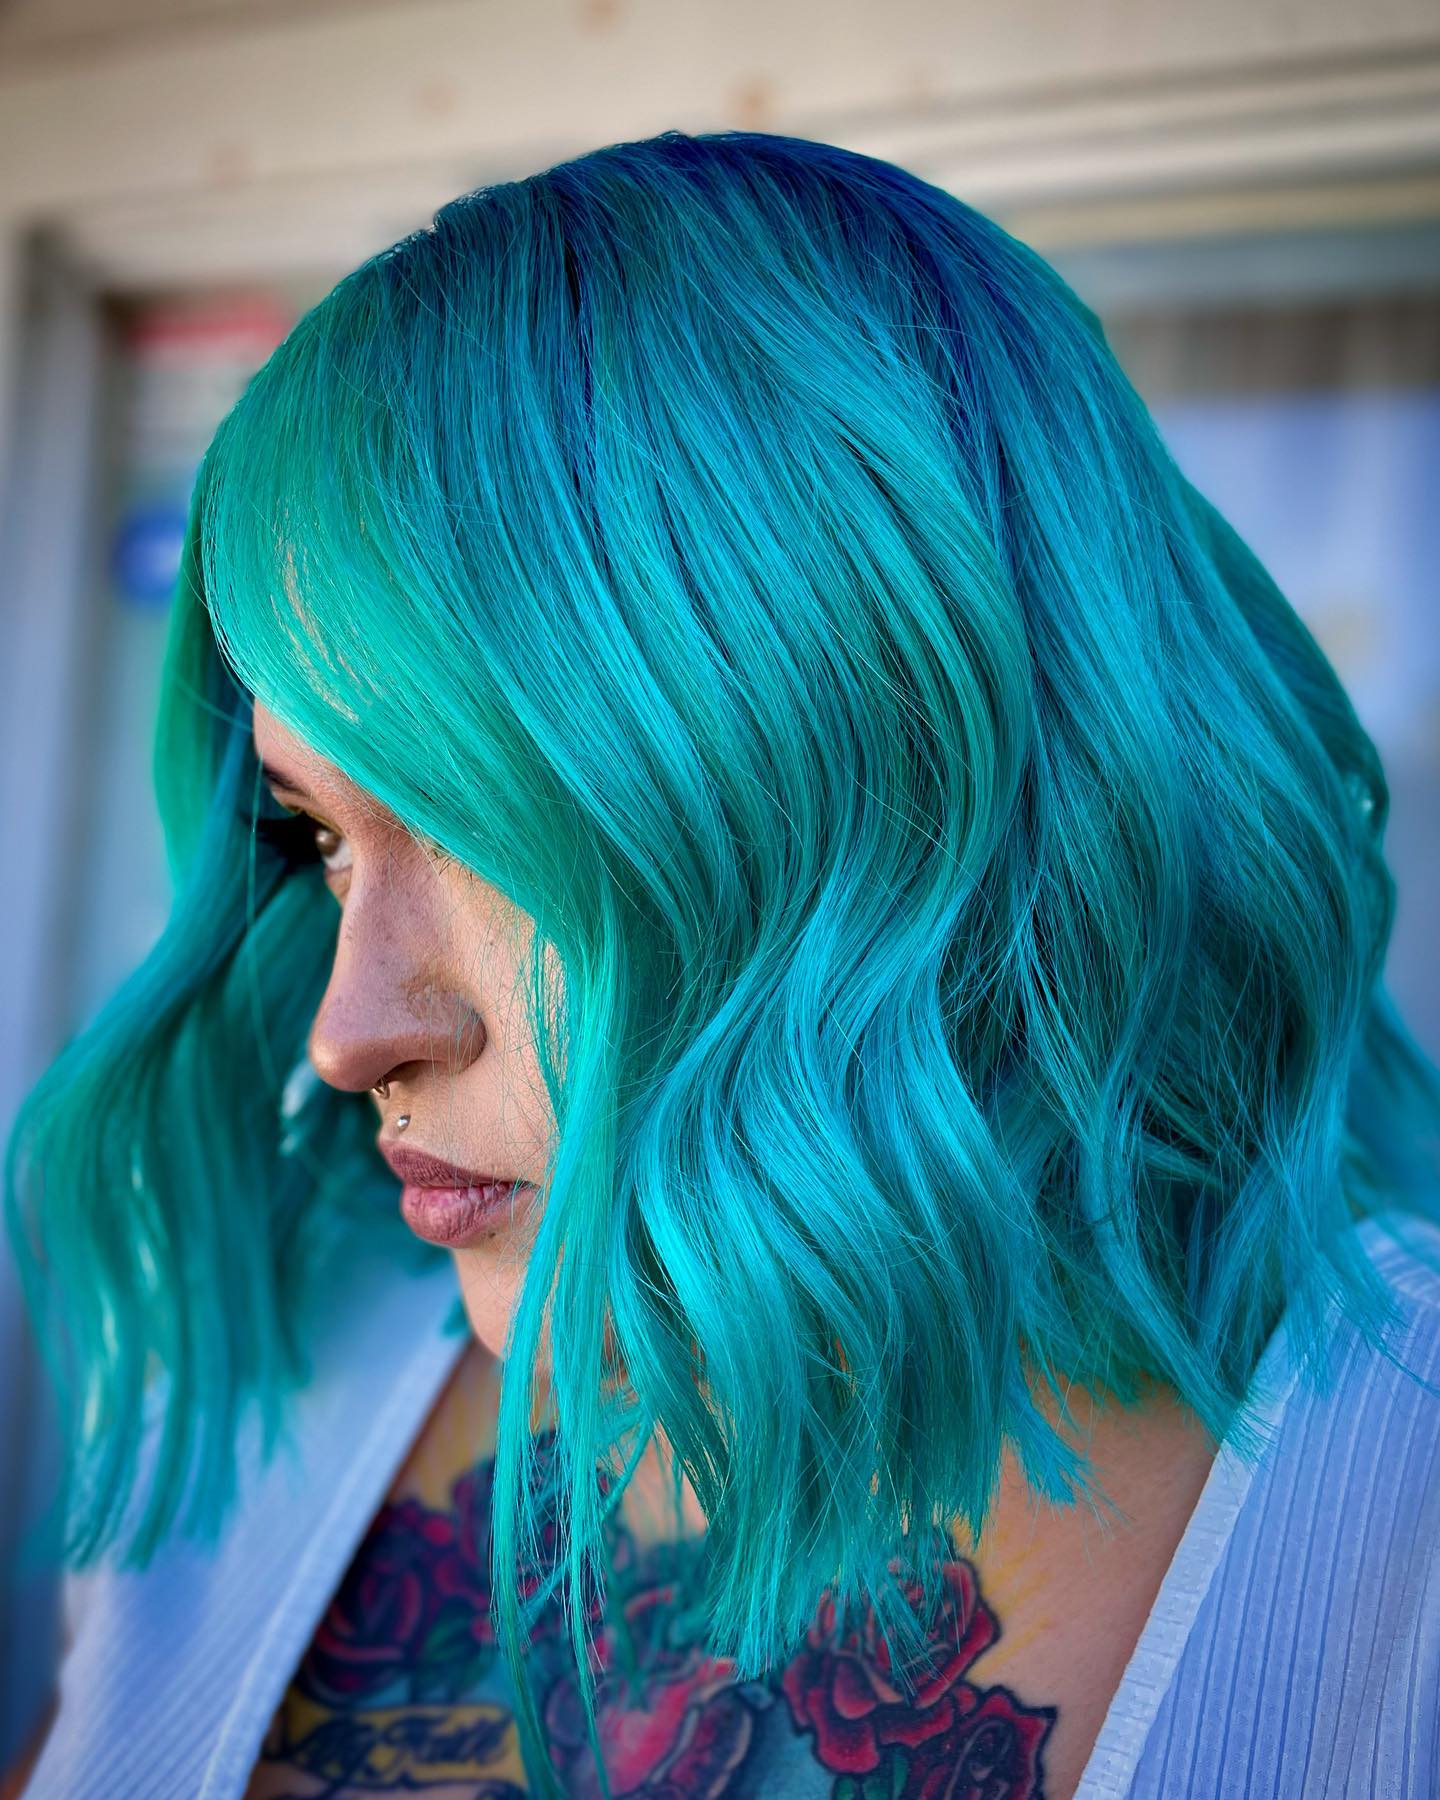 40 Crazy Hair Colour Ideas To Try in 2022 : Blue, Green and Orange Combo Hair  Colour I Take You | Wedding Readings | Wedding Ideas | Wedding Dresses |  Wedding Theme